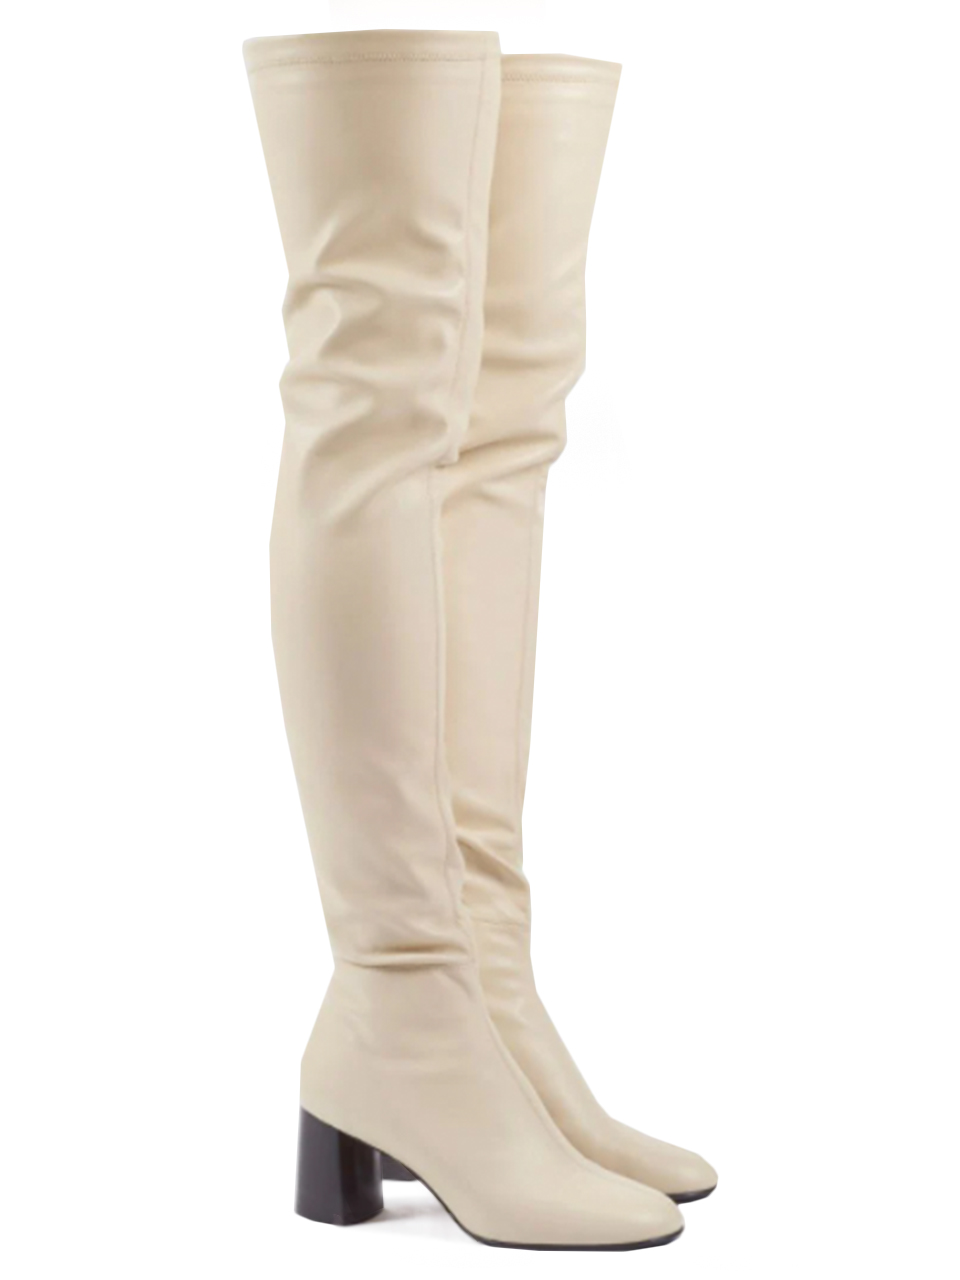 3.1 PHILLIP LIM Nadia Soft Over The Knee Boot in Bone Side View Both Boots